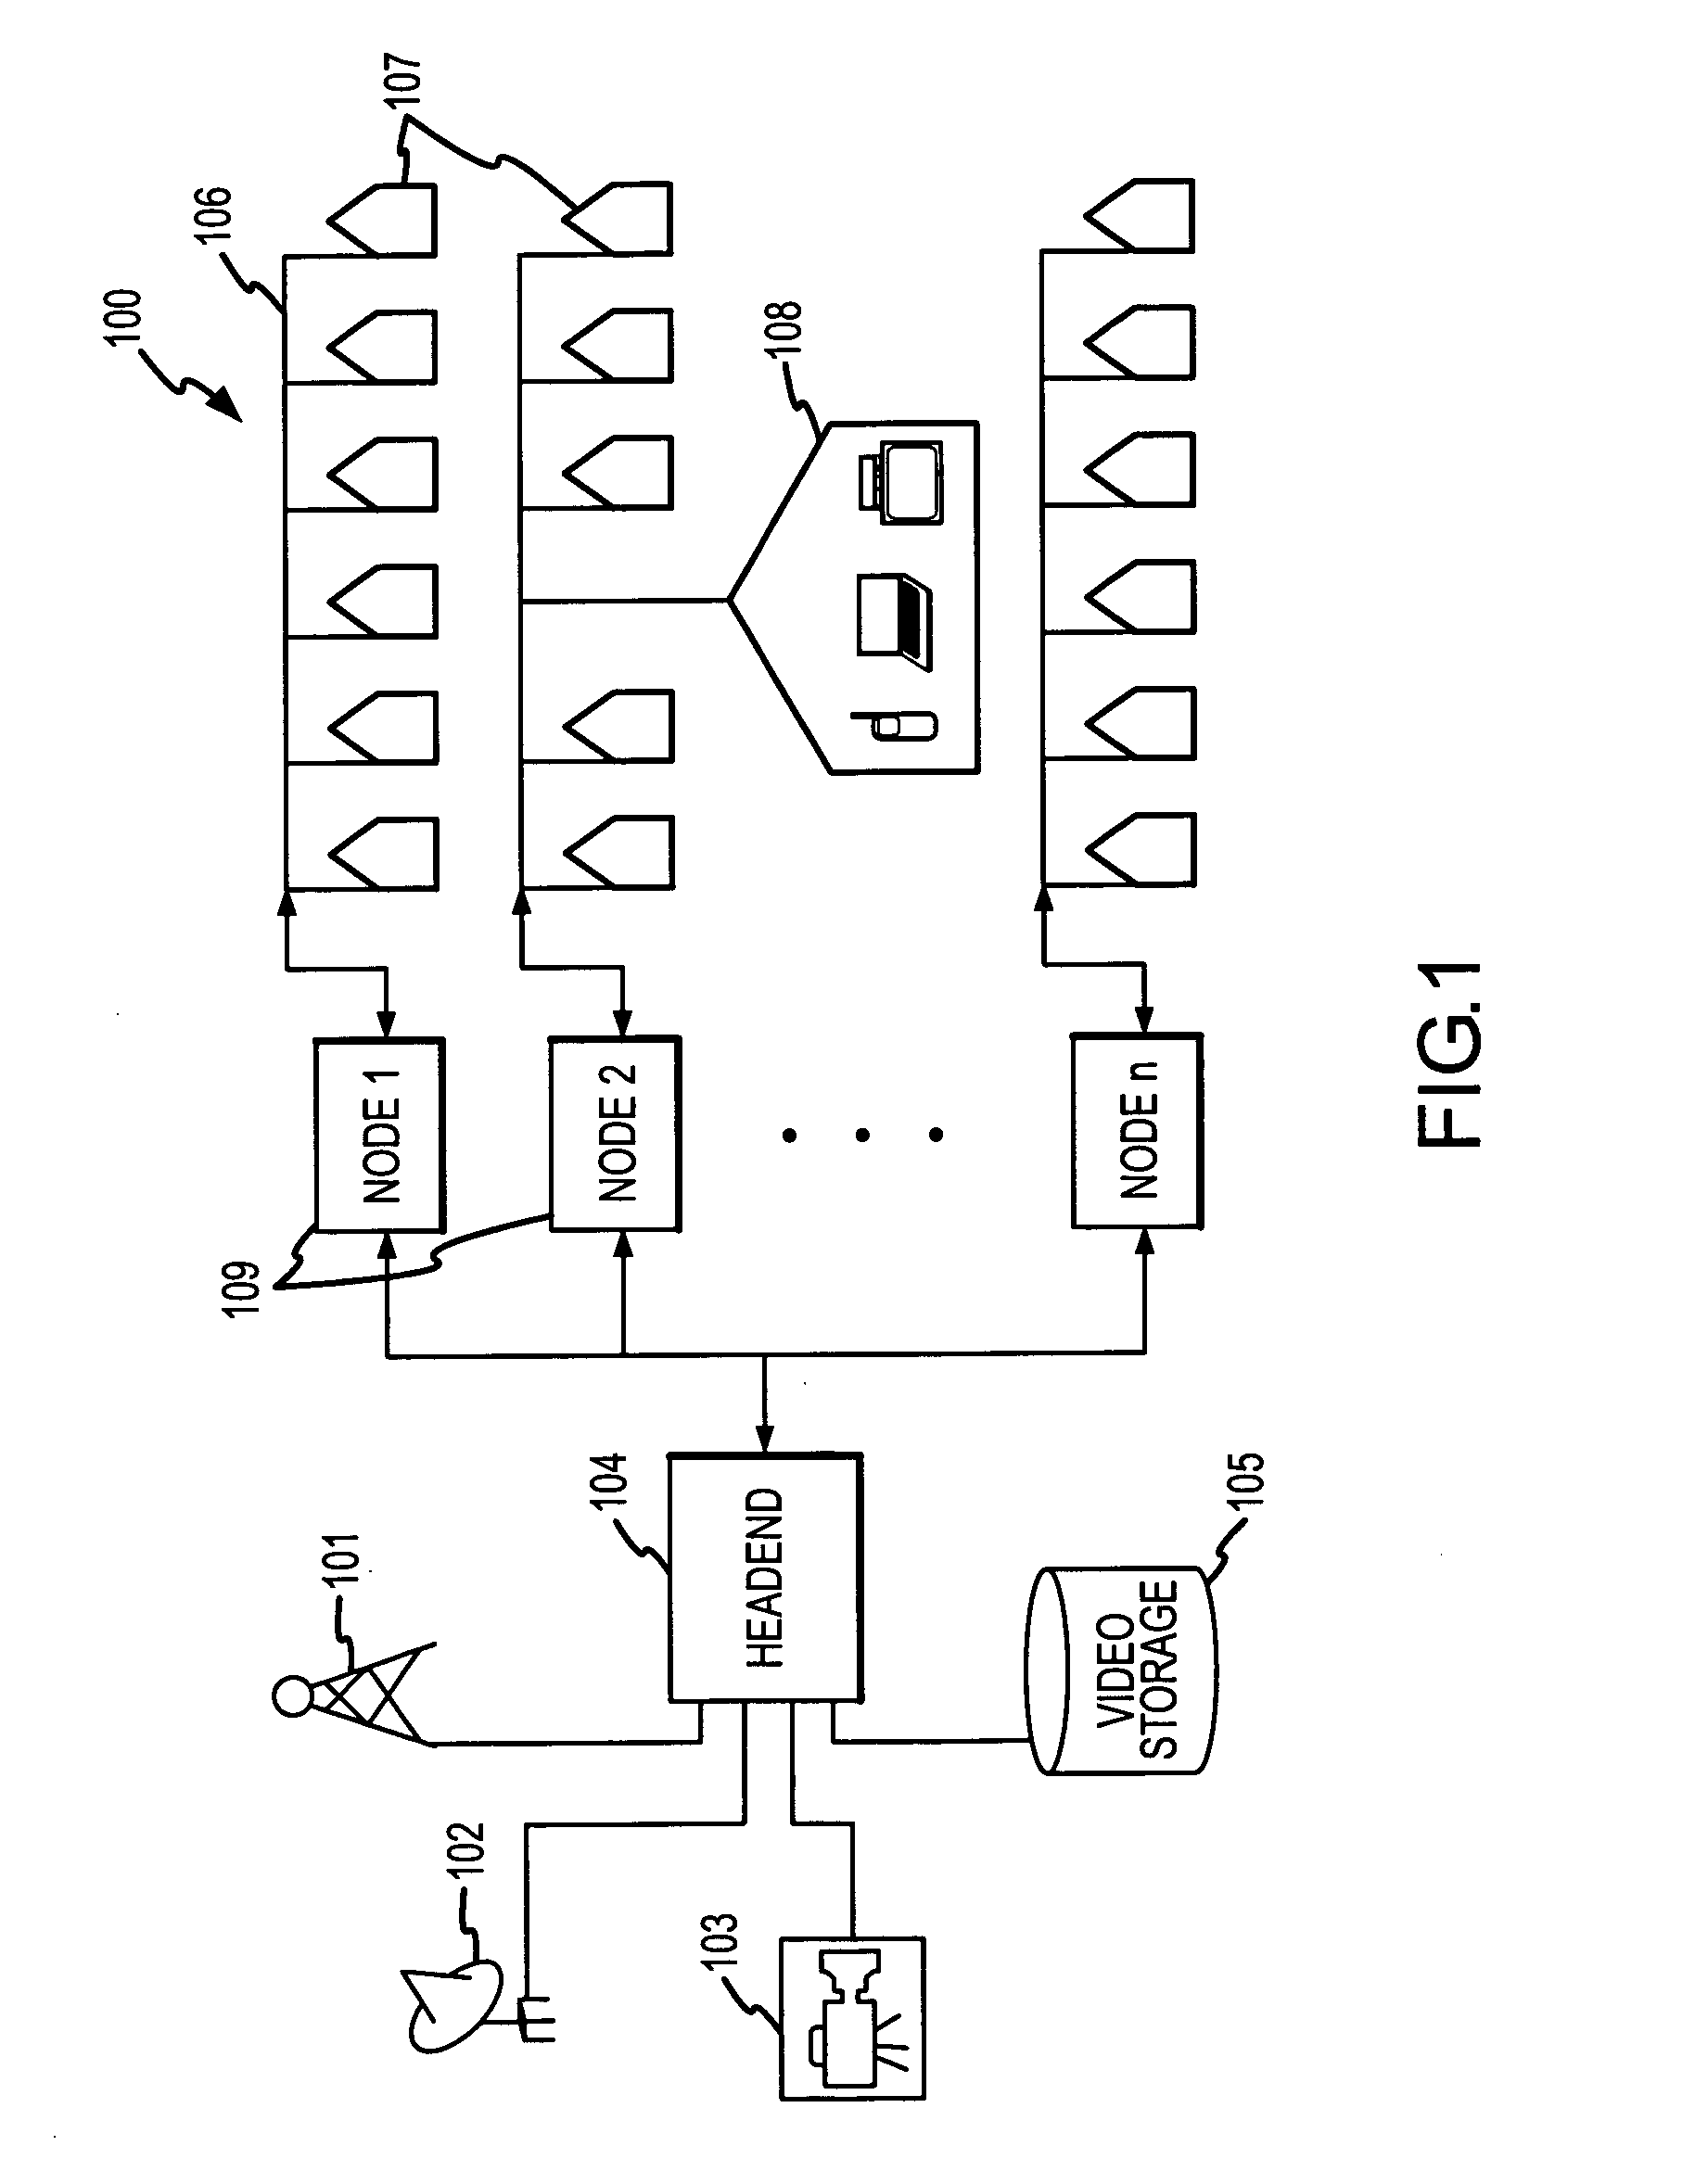 Content selection based on signaling from customer premises equipment in a broadcast network